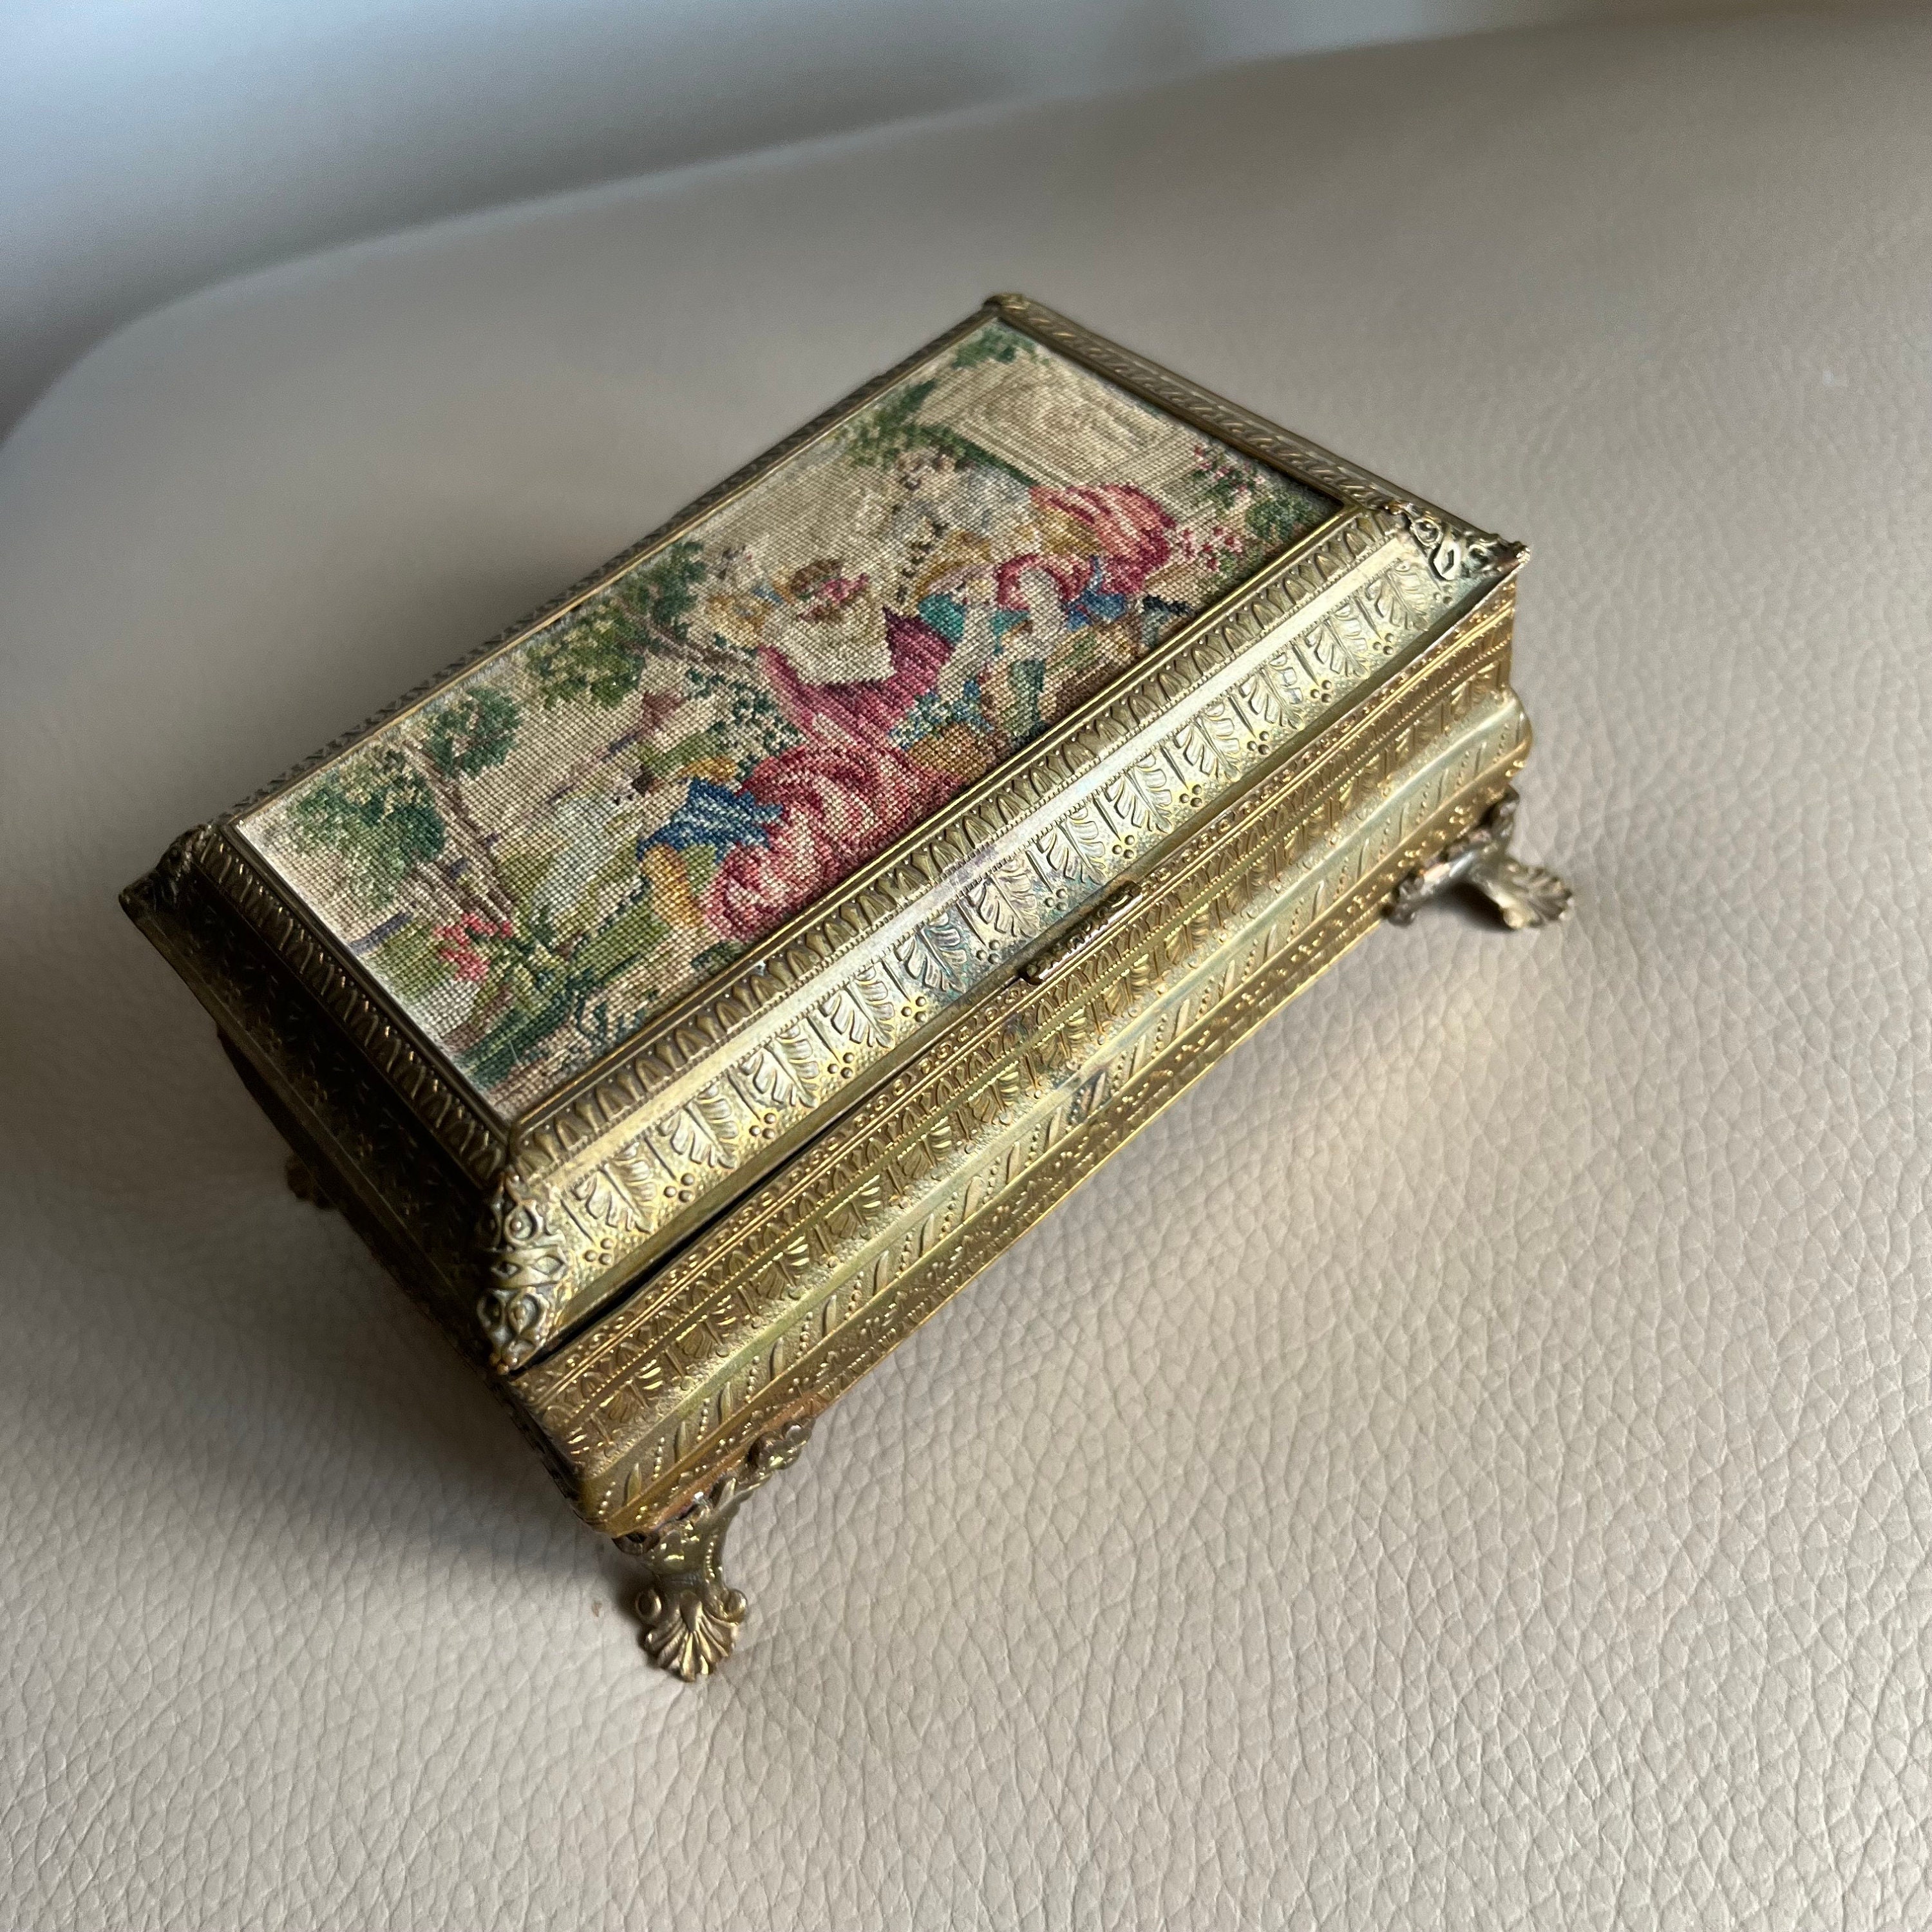 Vintage Brass Toned Travel Jewelry Box Red Velvet Lining Hinged Footed